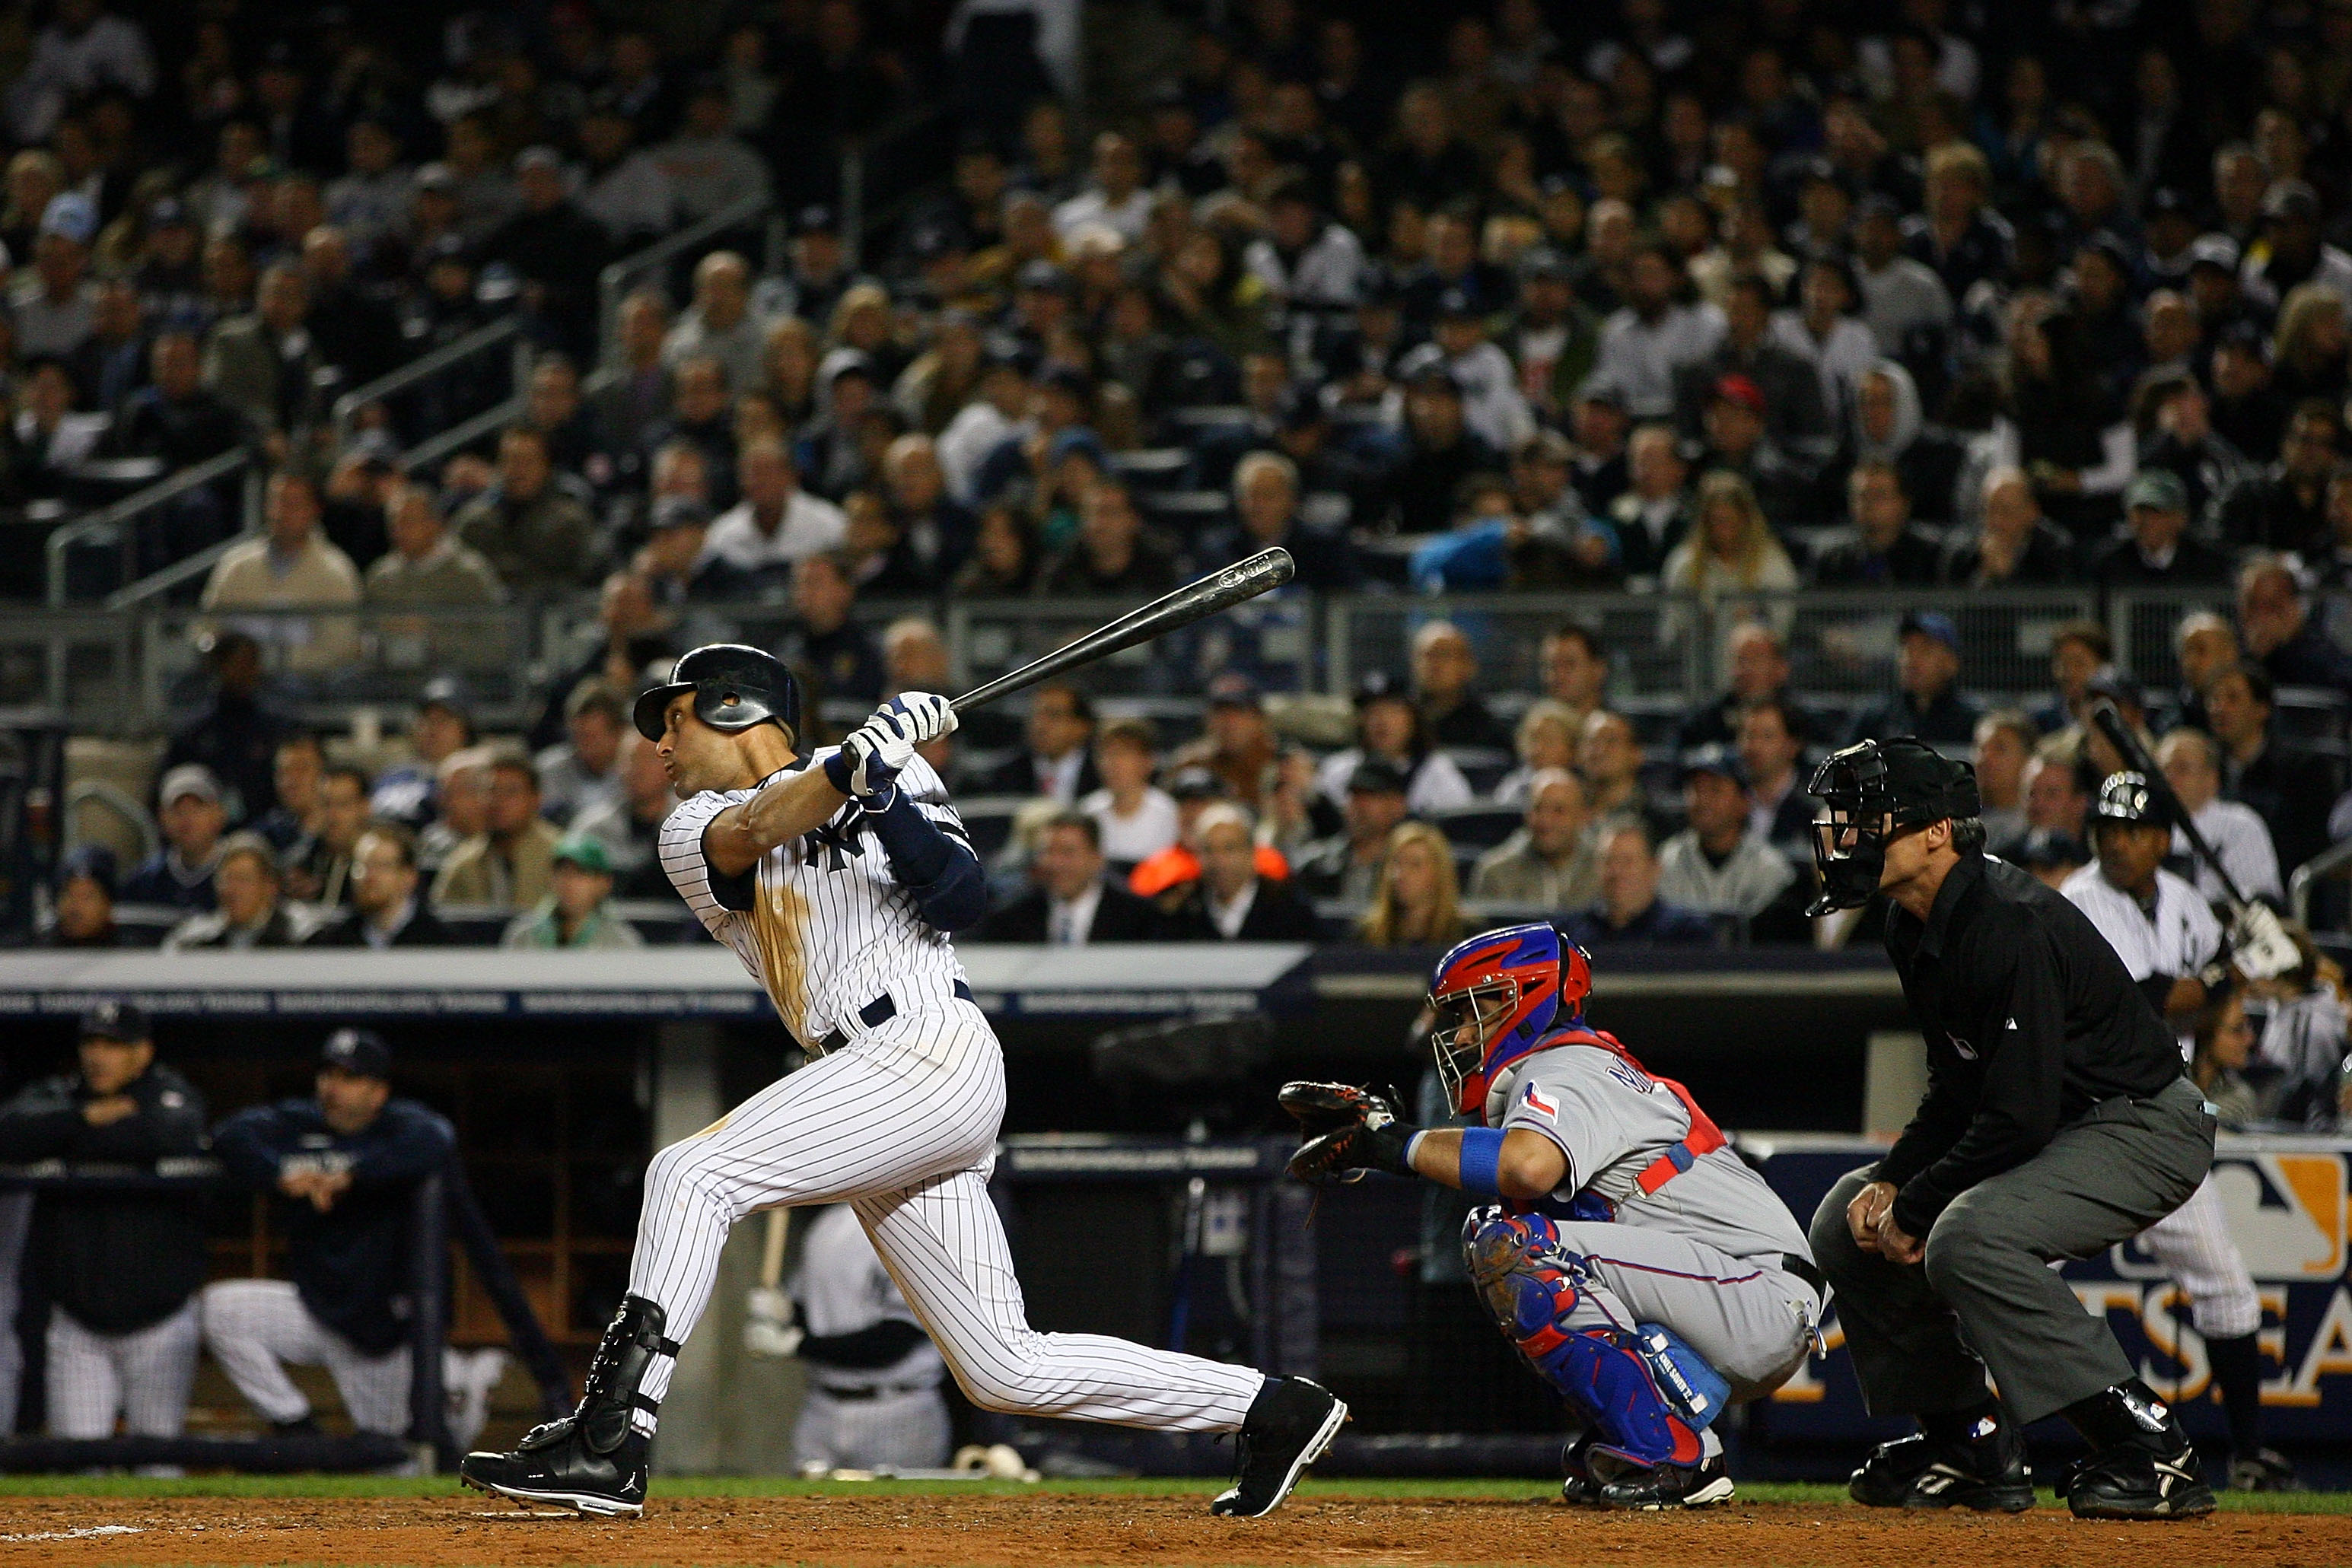 NEW YORK - OCTOBER 19:  Derek Jeter #2 of the New York Yankees hits a double in the fifth inning against the Texas Rangers in Game Four of the ALCS during the 2010 MLB Playoffs at Yankee Stadium on October 19, 2010 in the Bronx borough of New York City.